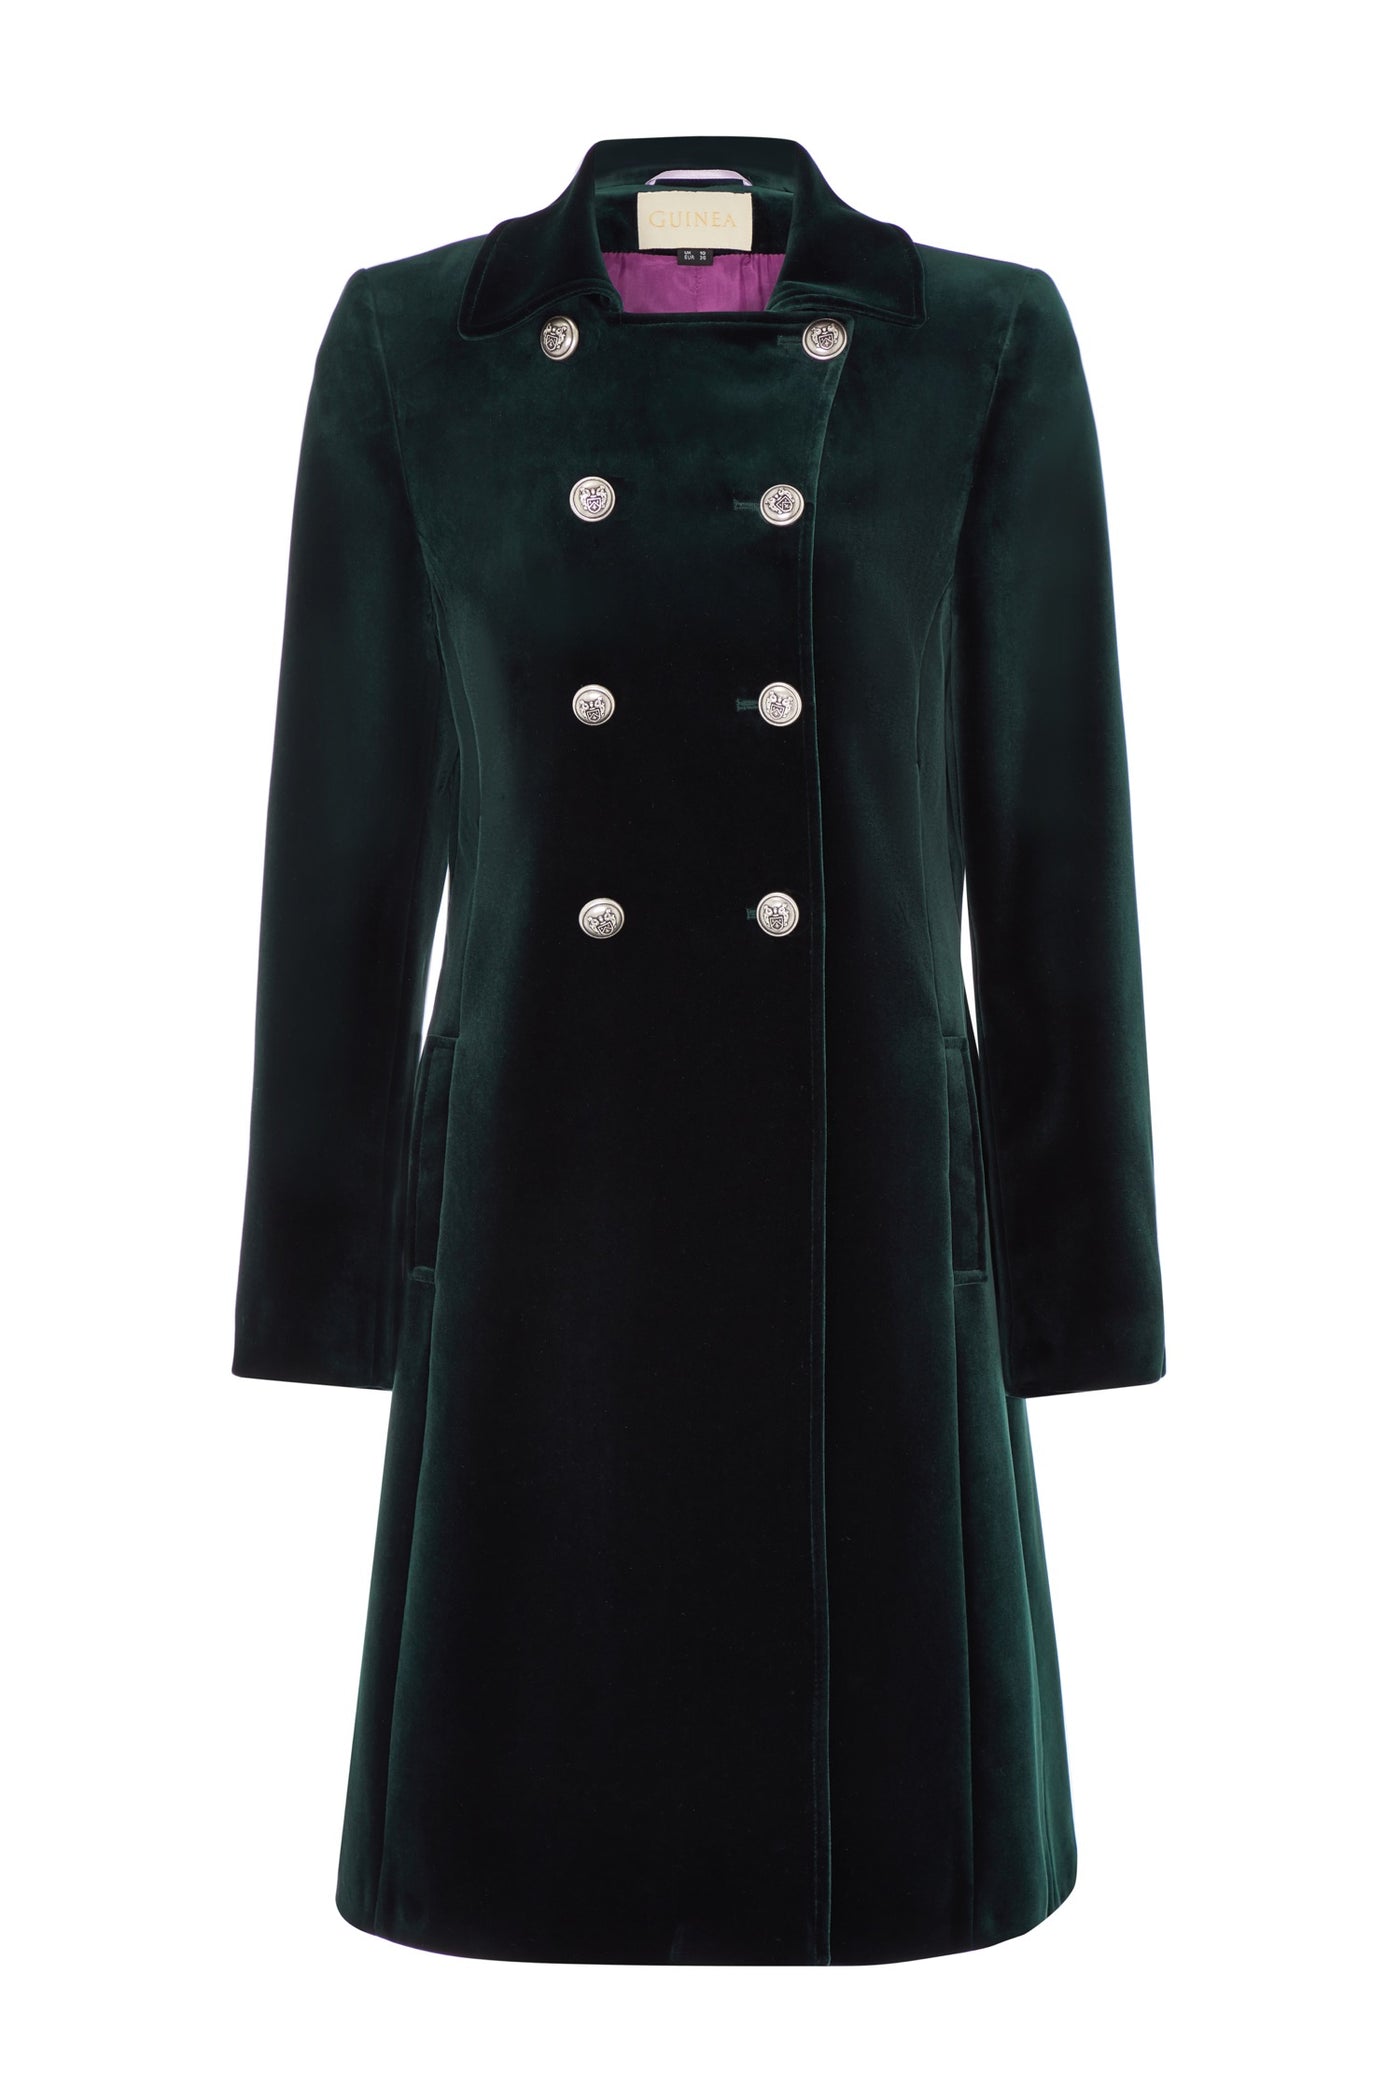 Women's mid length coat in dark green velvet. The coat has a classic military style with double breasted silver buttons